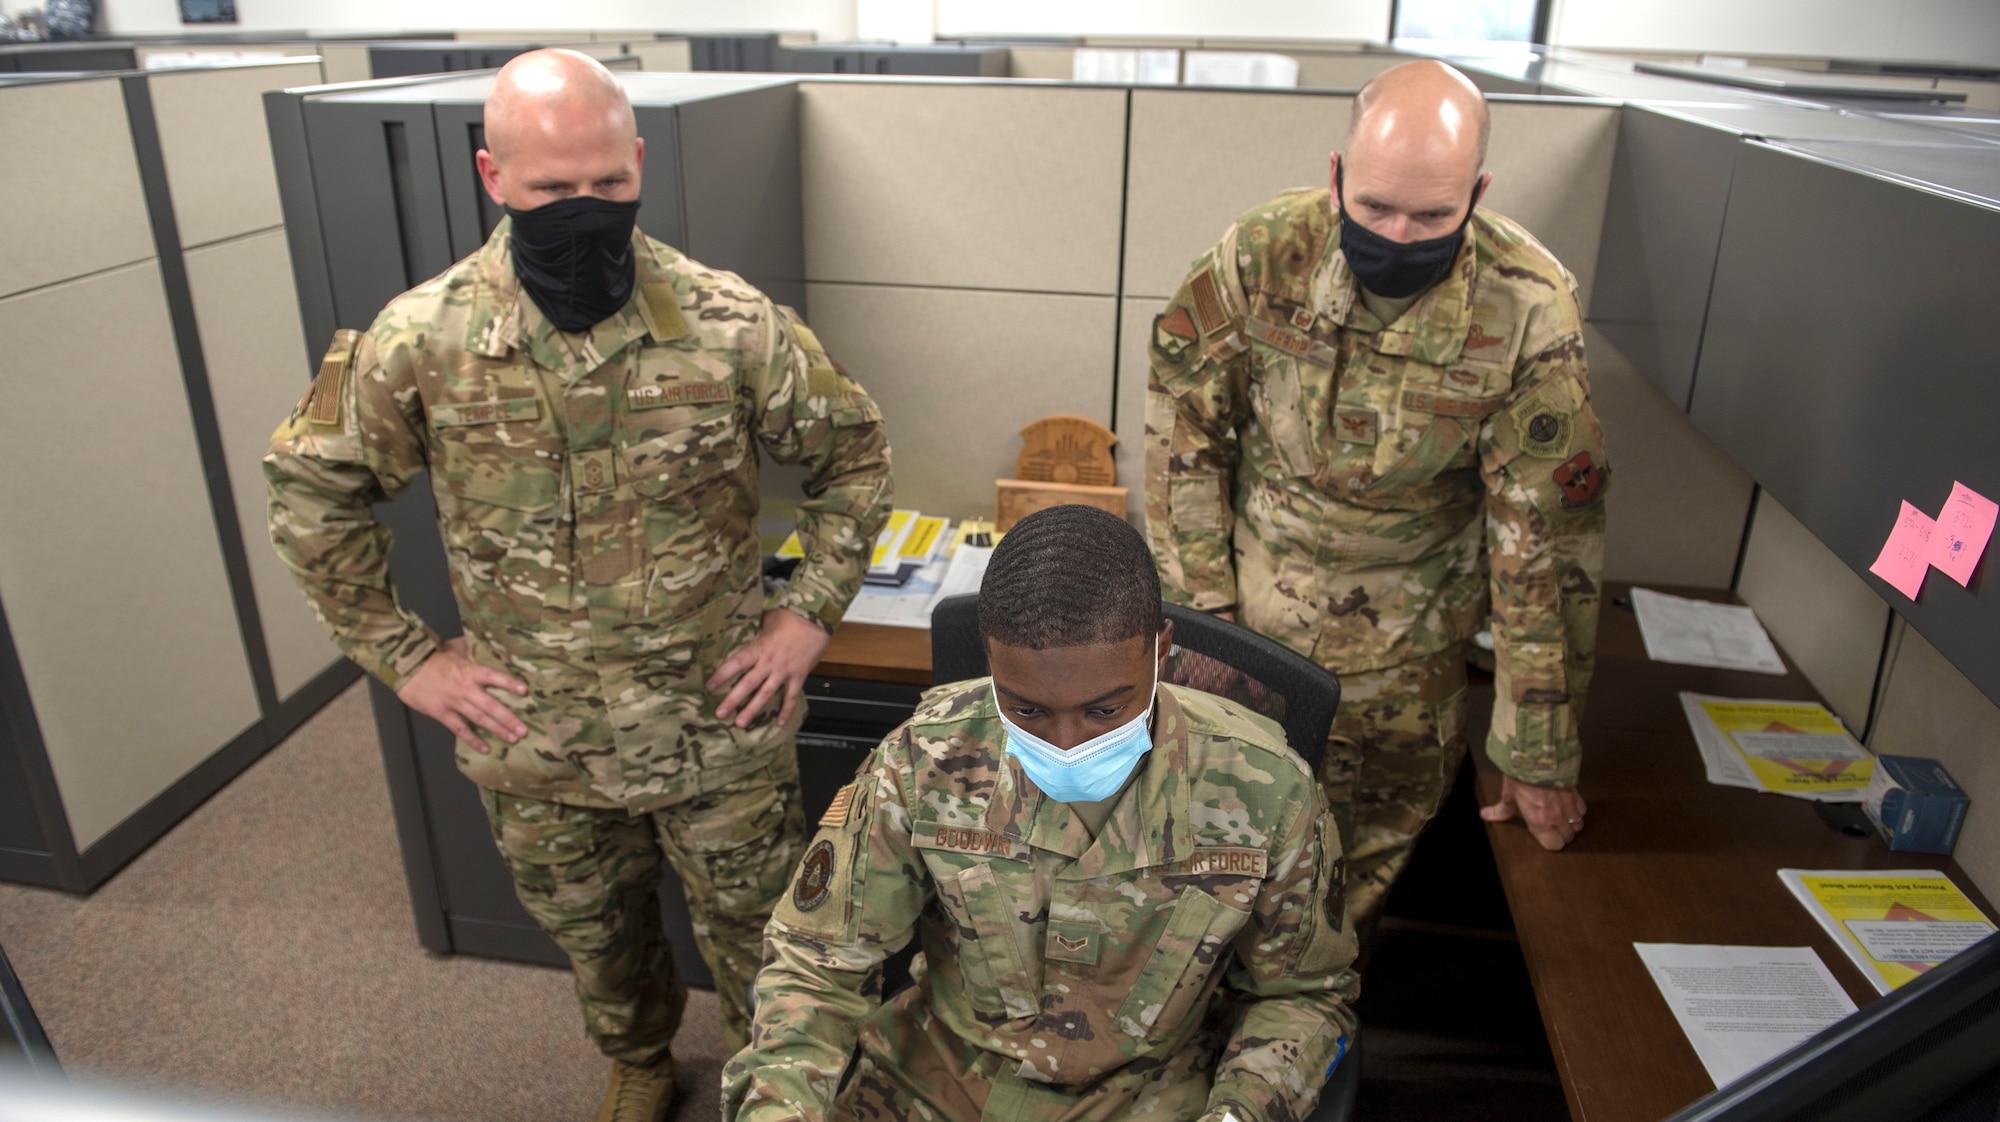 Airman 1st Class Eric Goodwin, 49th Comptroller Squadron financial operations technician, briefs, from left to right, Chief Master Sgt. Thomas Temple, 49th Wing command chief, and Col Ryan Keeney, 49th Wing commander, Aug. 17, 2020, on Holloman Air Force Base, New Mexico. Goodwin has taken on the responsibility of four Airmen by running the Permanent Change of Station section for the last six months. (U.S. Air Force photo by Staff Sgt. Christine Groening)